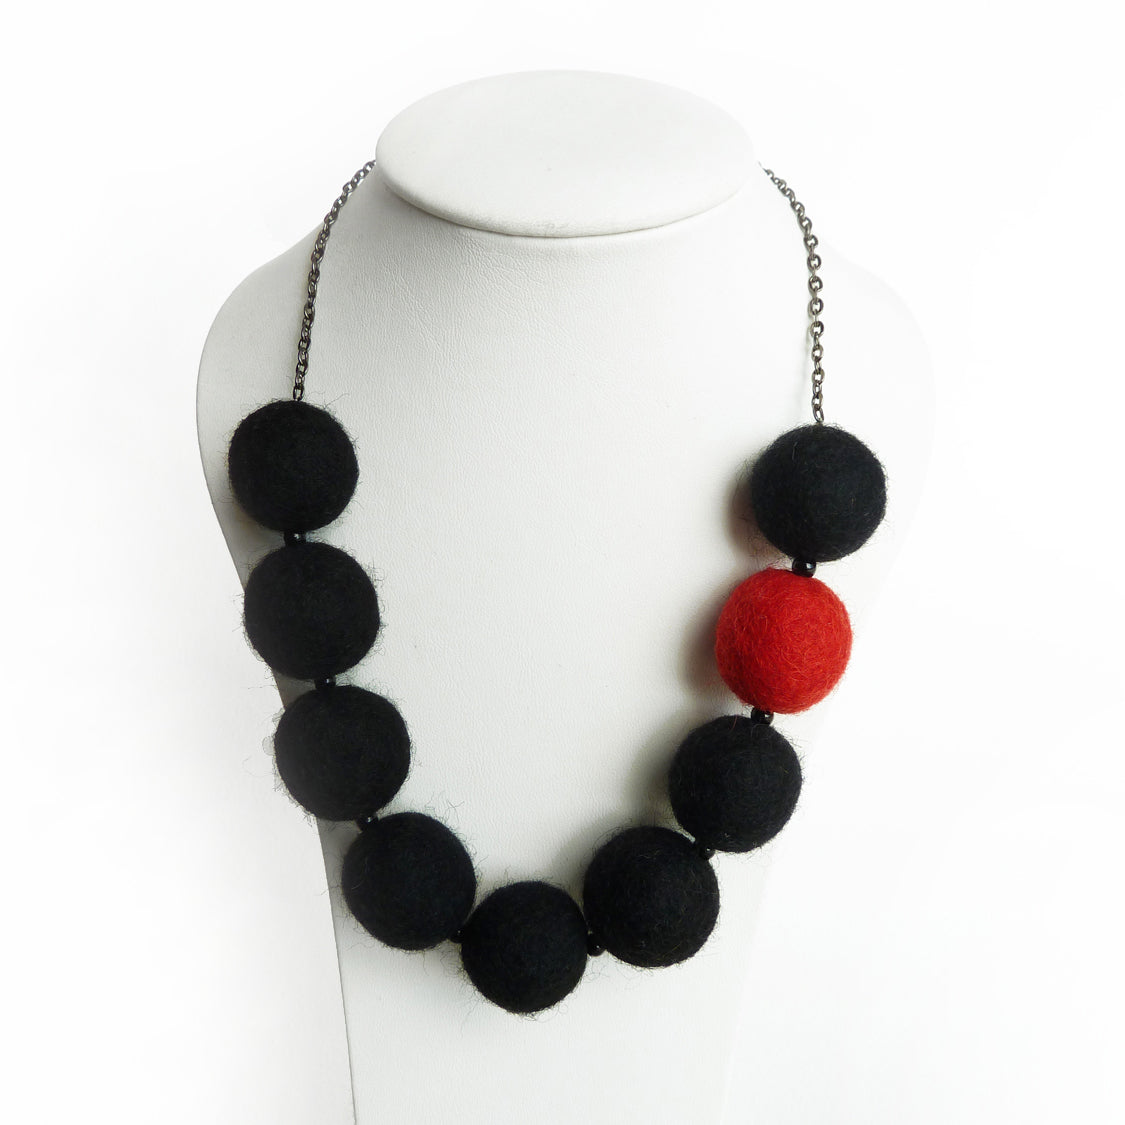 Chunky black and red felt necklace